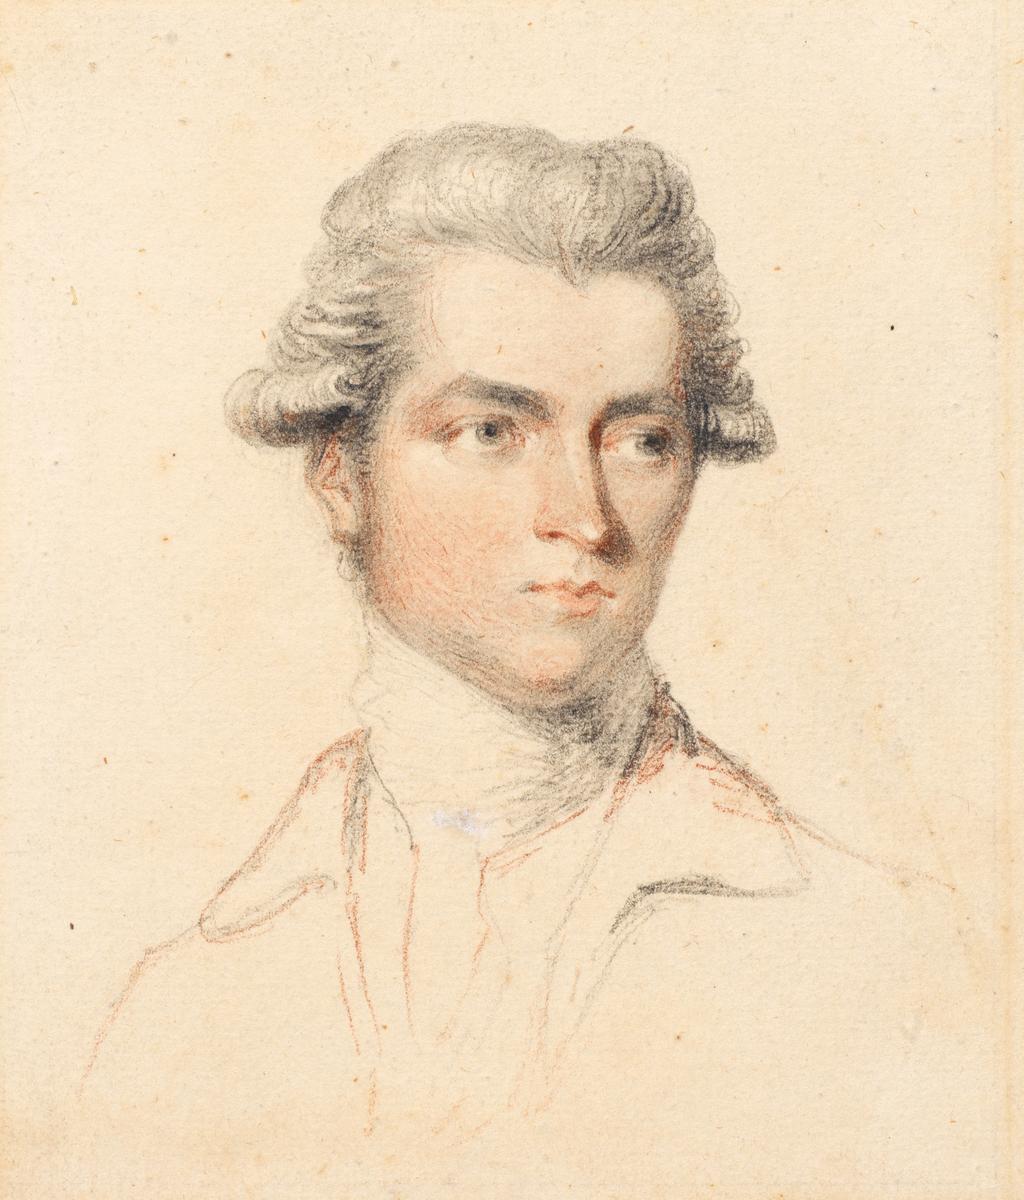 An image of Humphry, Ozias. Sir William Lemon, Bart 1748-1824. Black and red chalk on card. 1772.